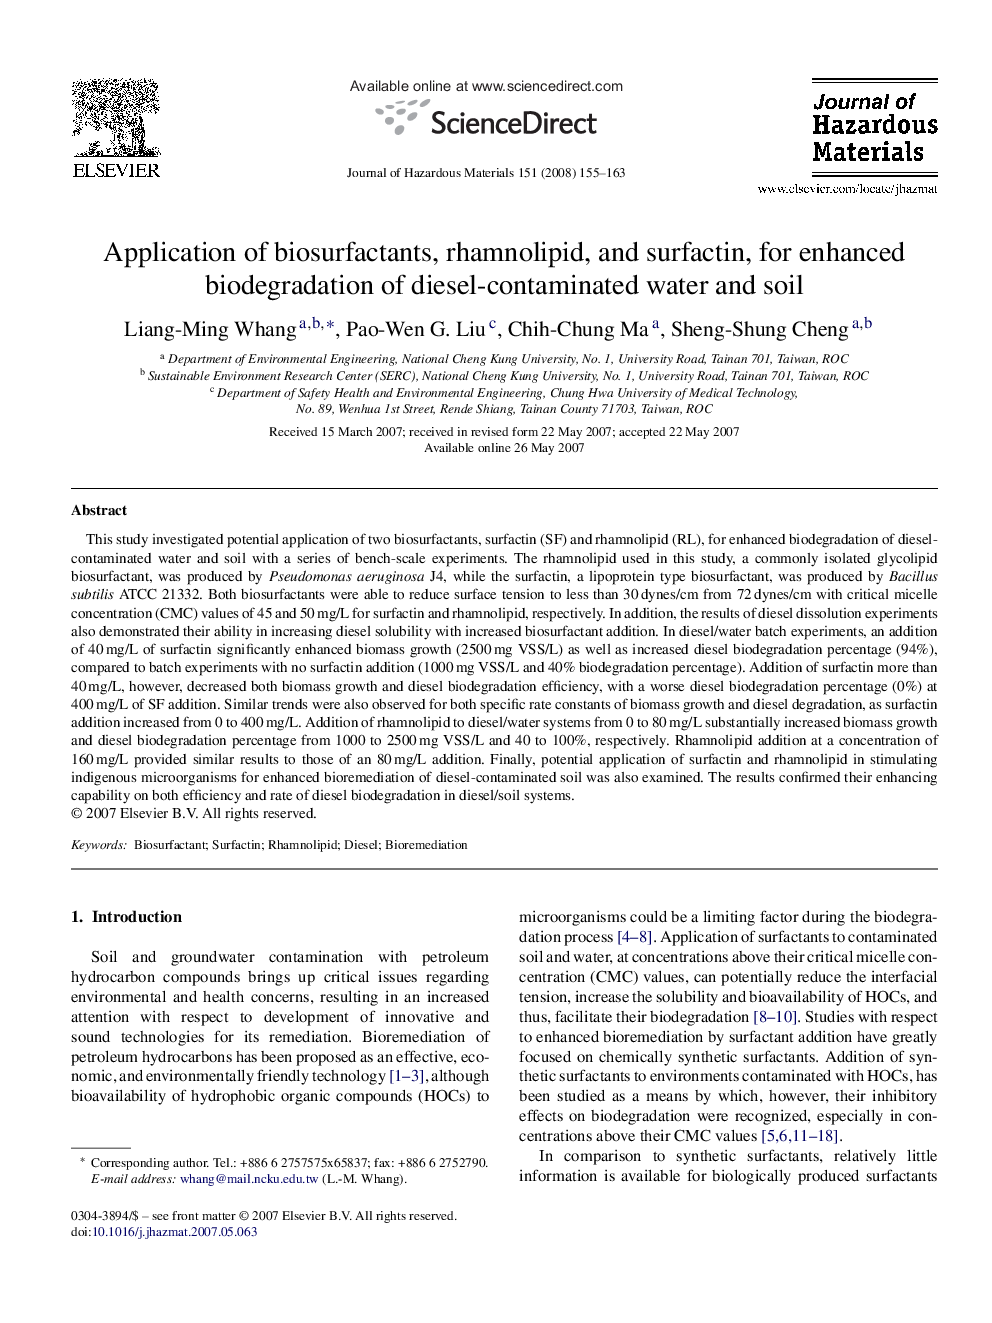 Application of biosurfactants, rhamnolipid, and surfactin, for enhanced biodegradation of diesel-contaminated water and soil